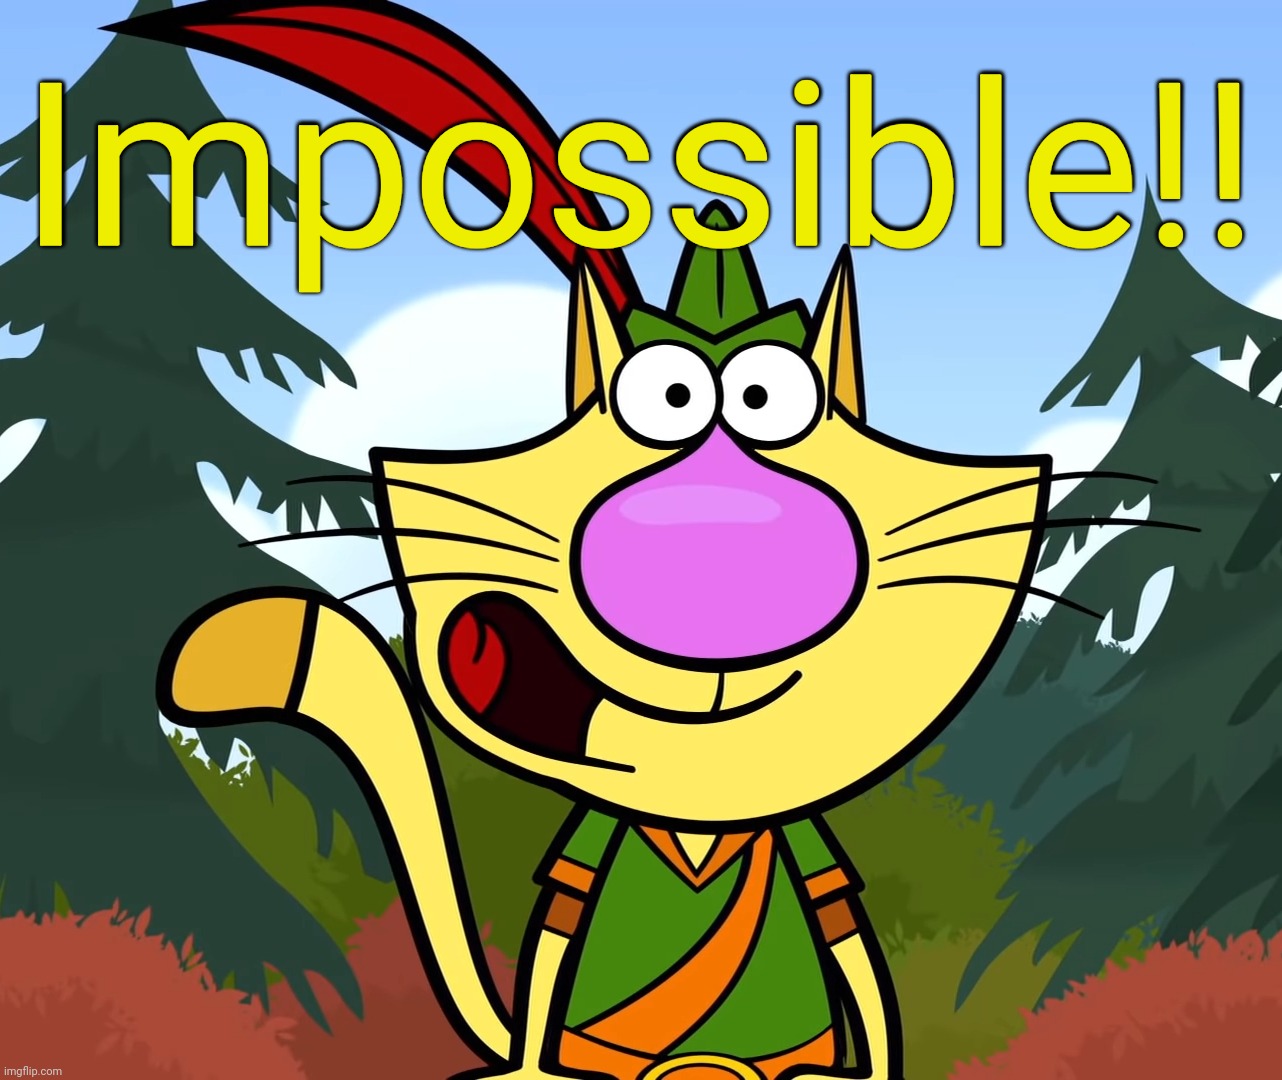 No Way!! (Nature Cat) | Impossible!! | image tagged in no way nature cat | made w/ Imgflip meme maker